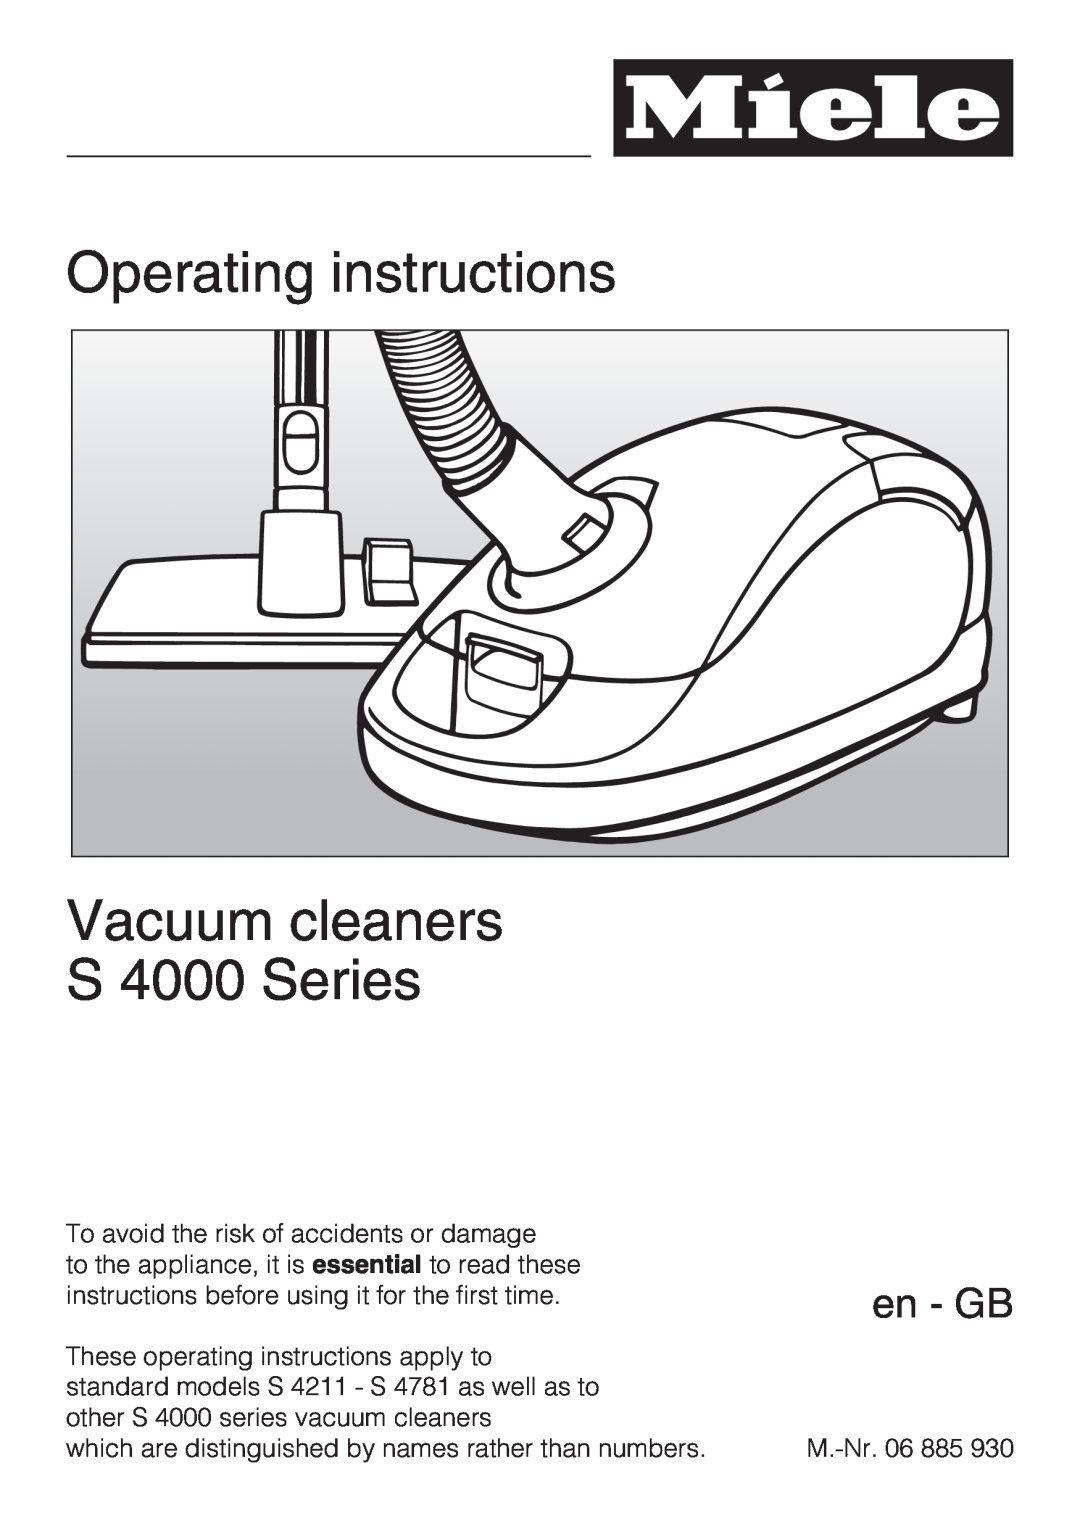 Miele manual Operating instructions, Vacuum cleaners S 4000 Series, en - GB 